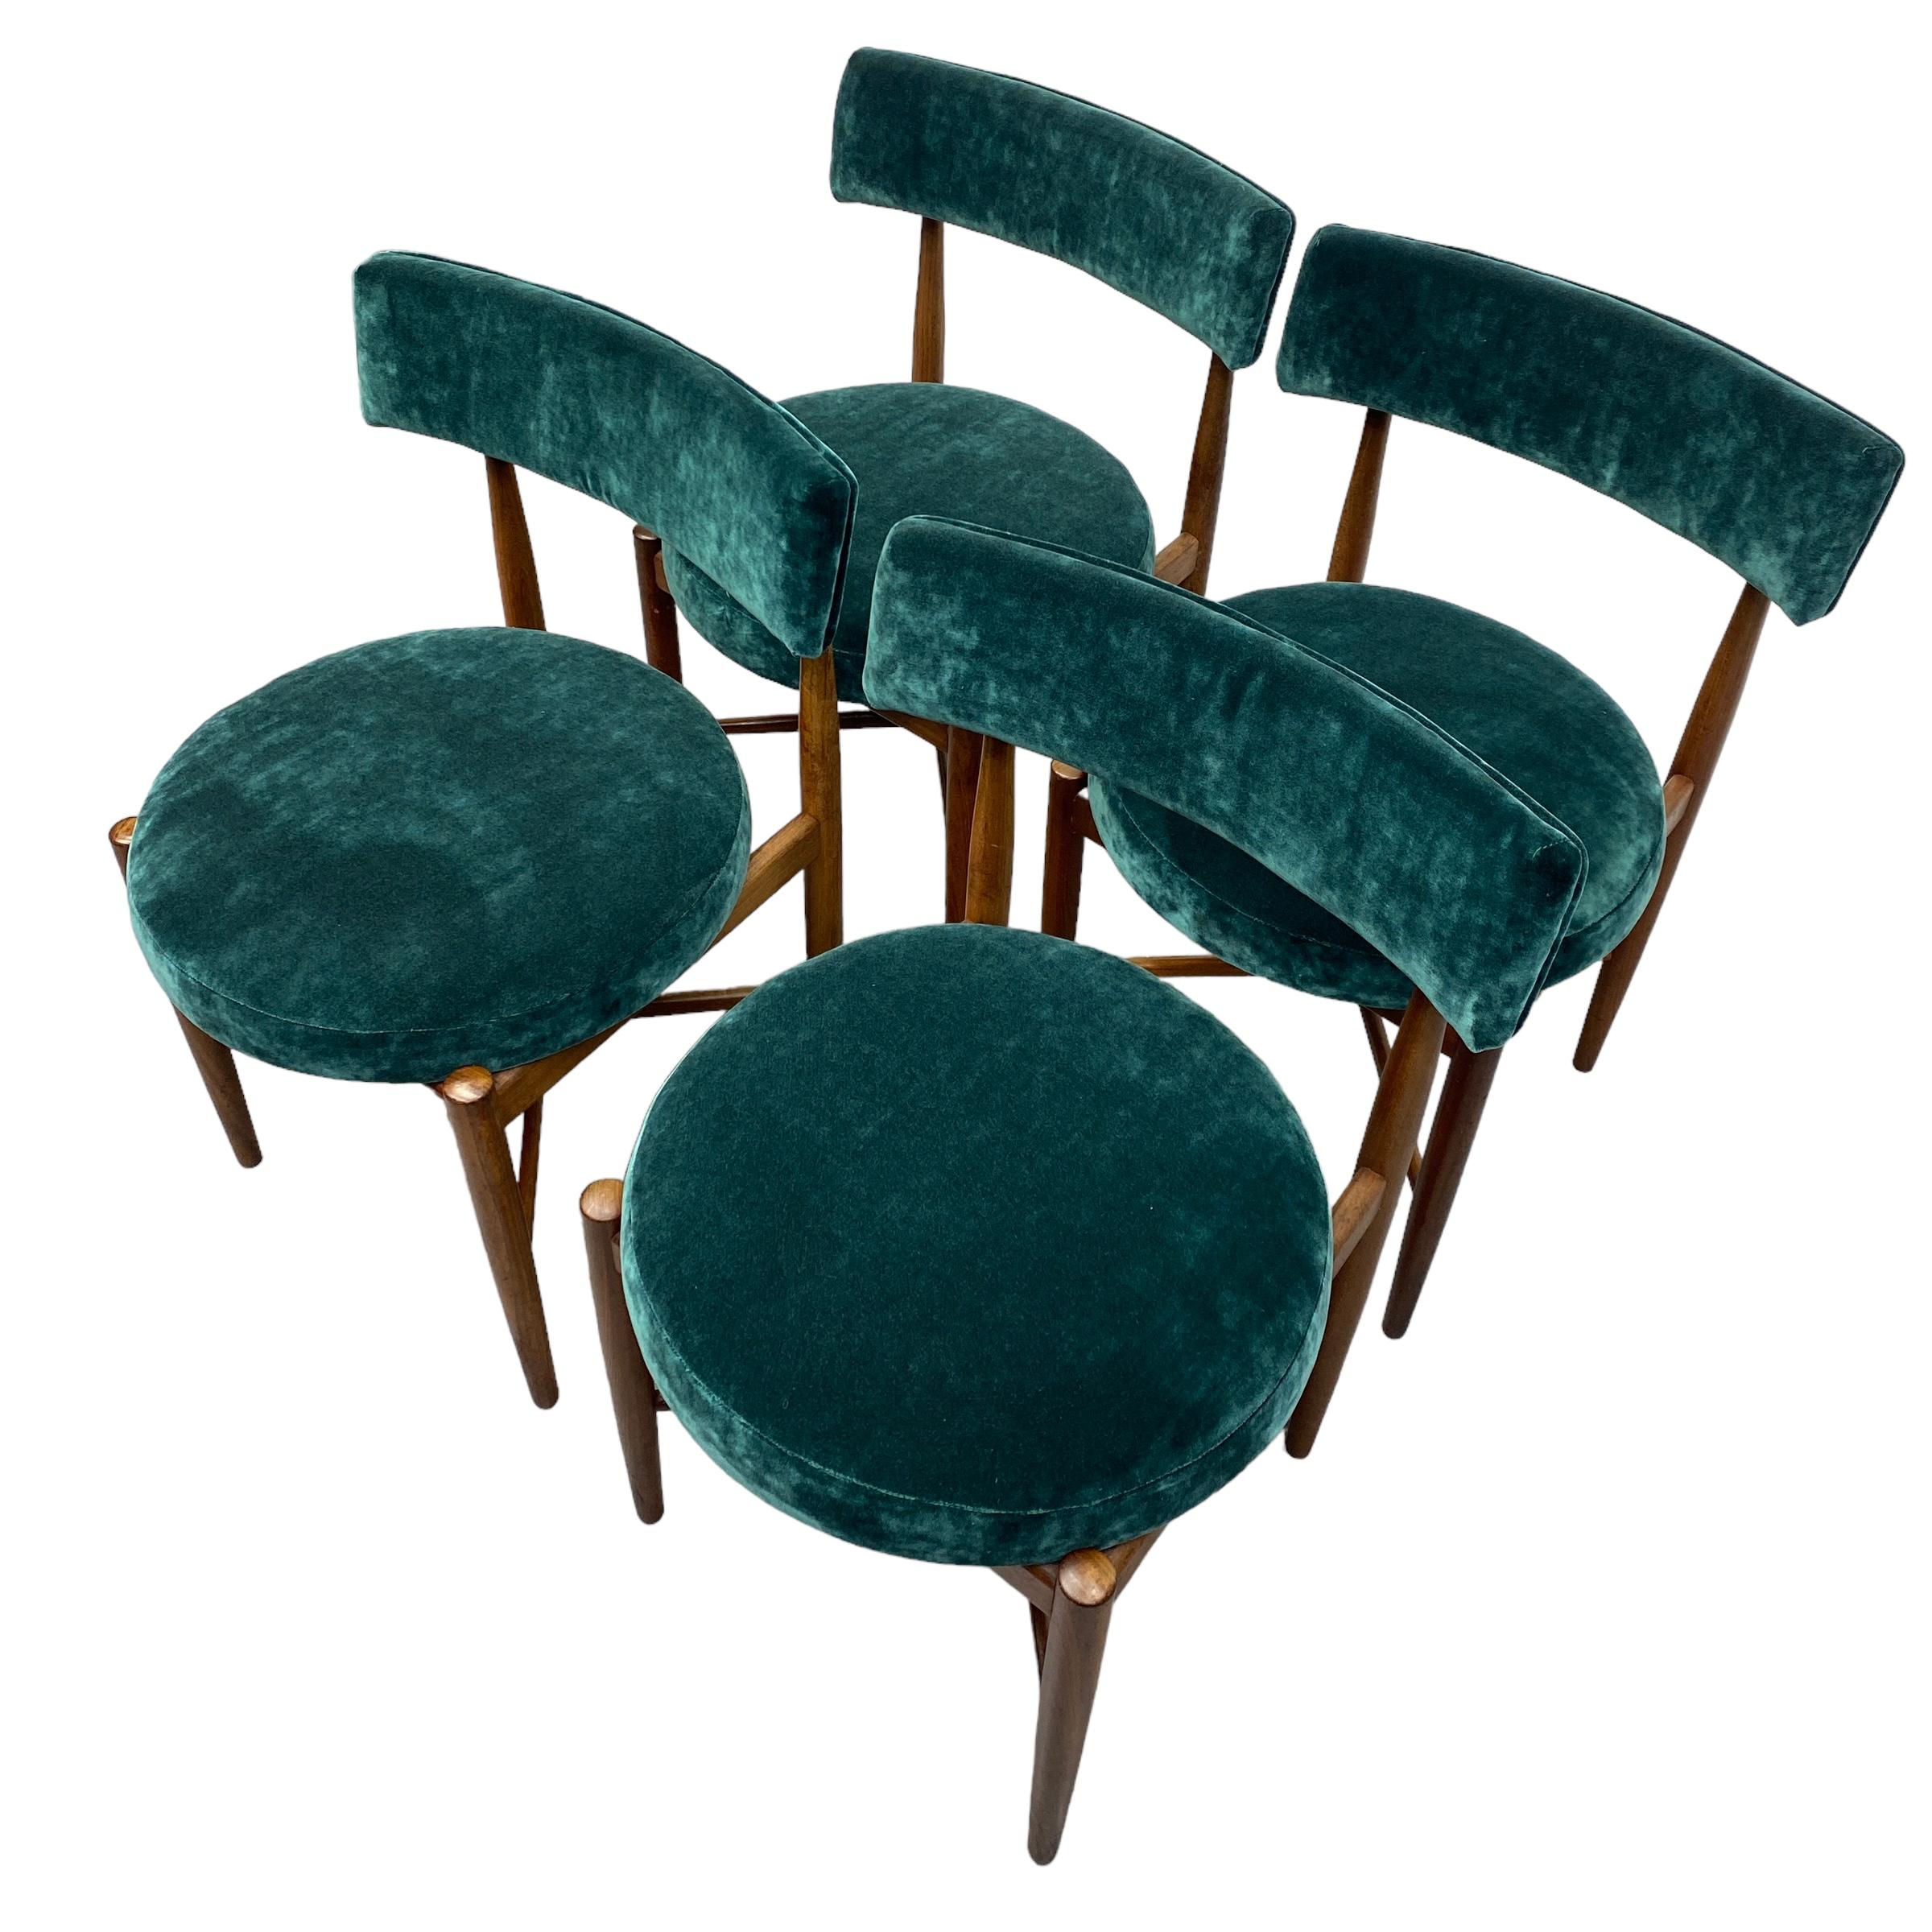 A set of four mid century Danish inspired Kofod Larsen for G Plan dining chairs. The dining chair legs & frame are in beautiful teak. The back rest & seats are professionally reupholstered in emerald green velvet. The dining chairs are very stylish